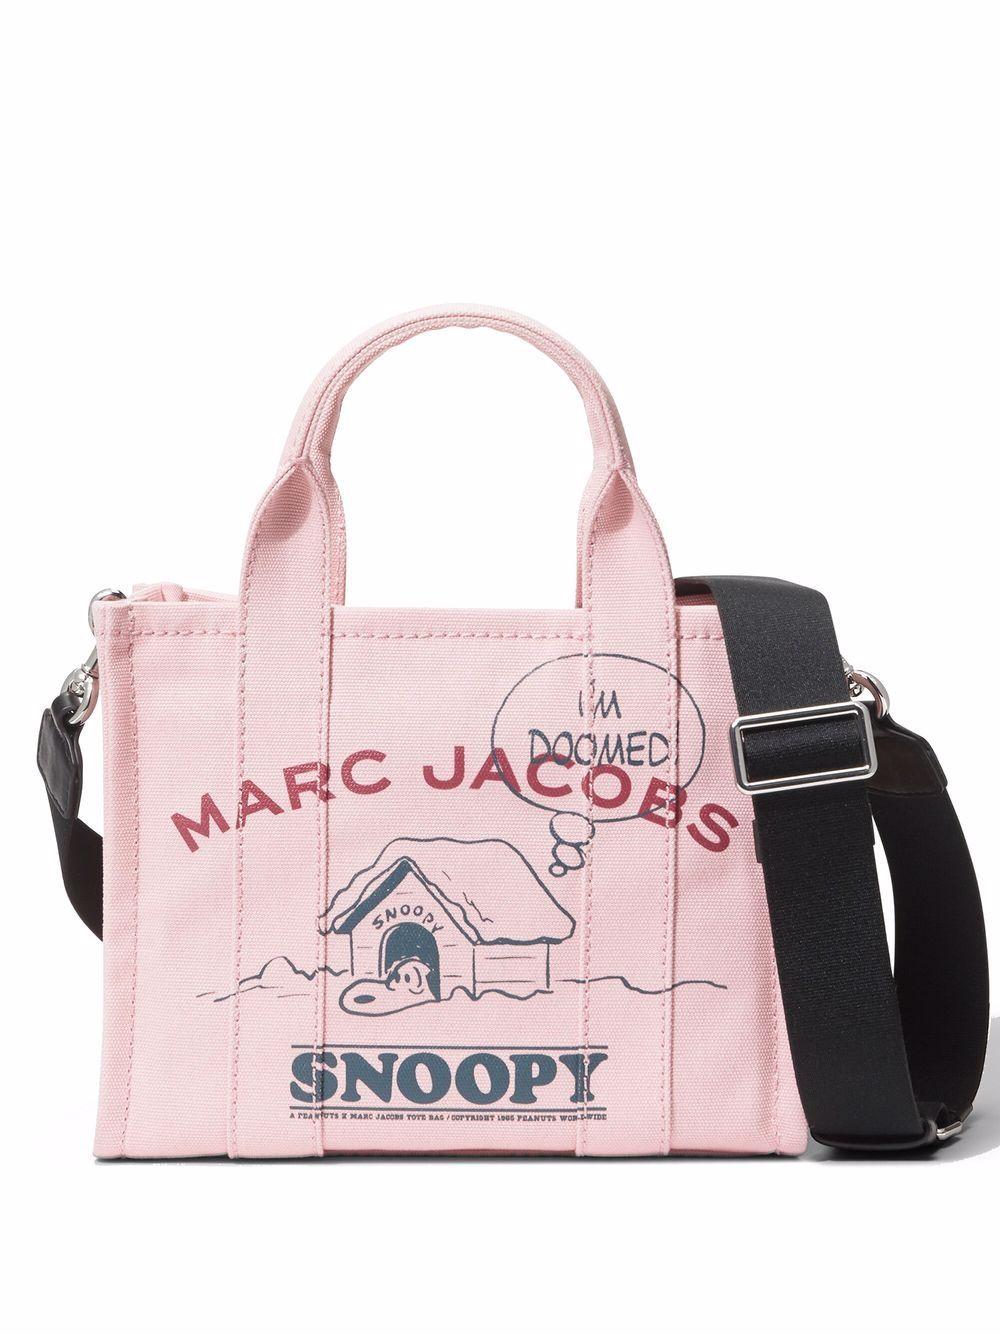 Marc Jacobs X Peanuts The Snoopy Mini Tote Bag in Pink | Lyst